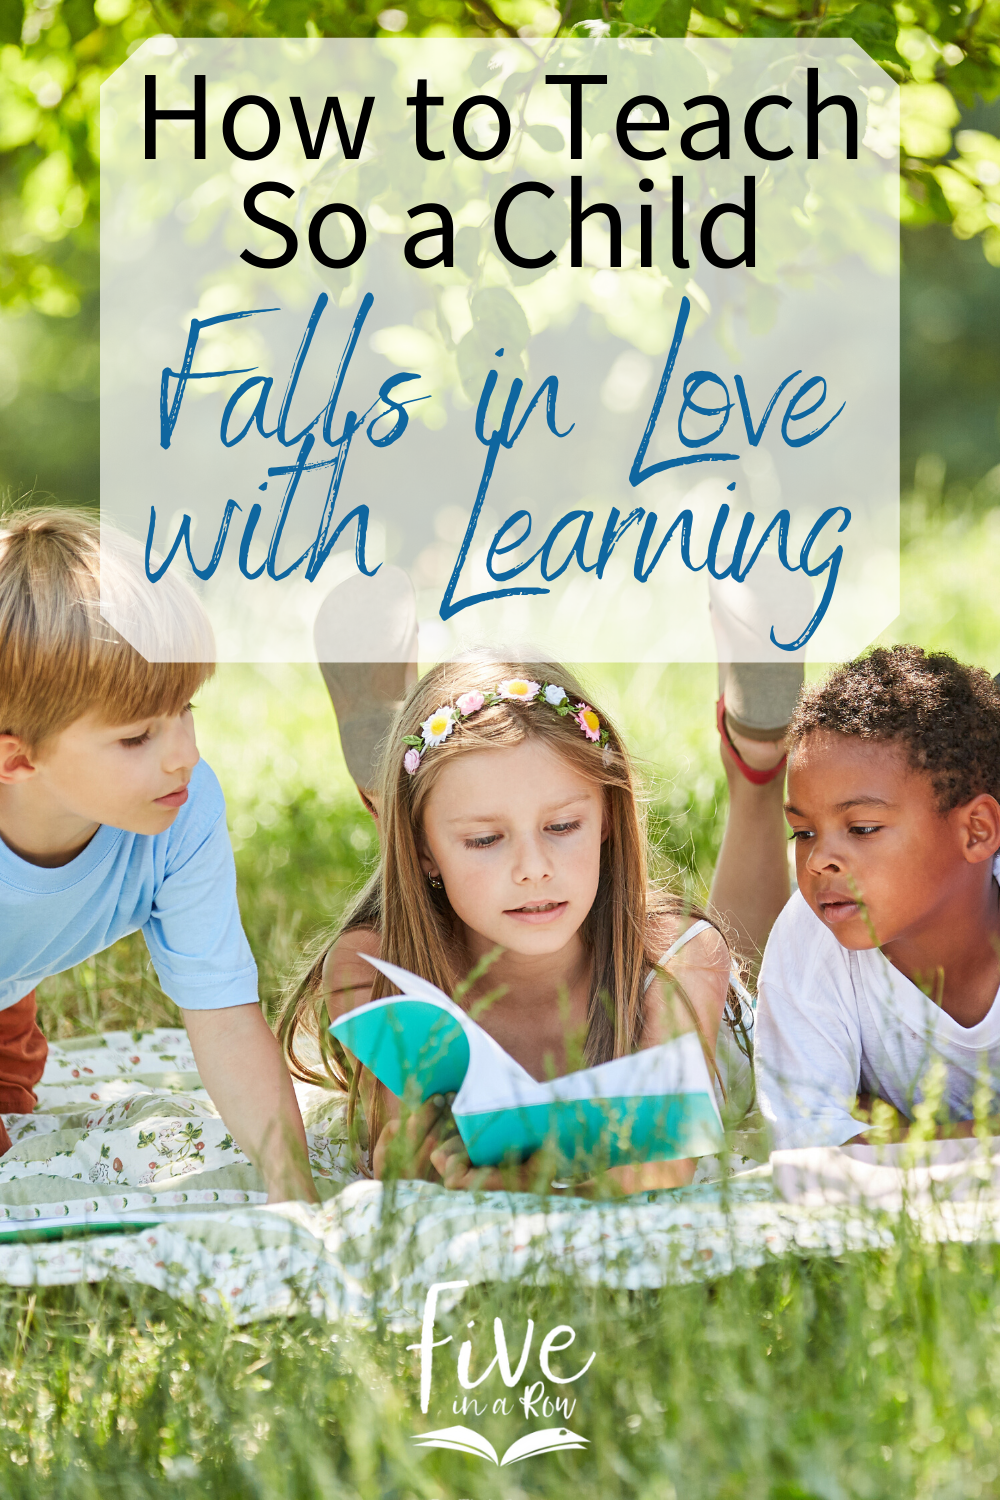 Steve Lambert from Five in a Row shares the key to how to teach your child so that he falls in love with learning..